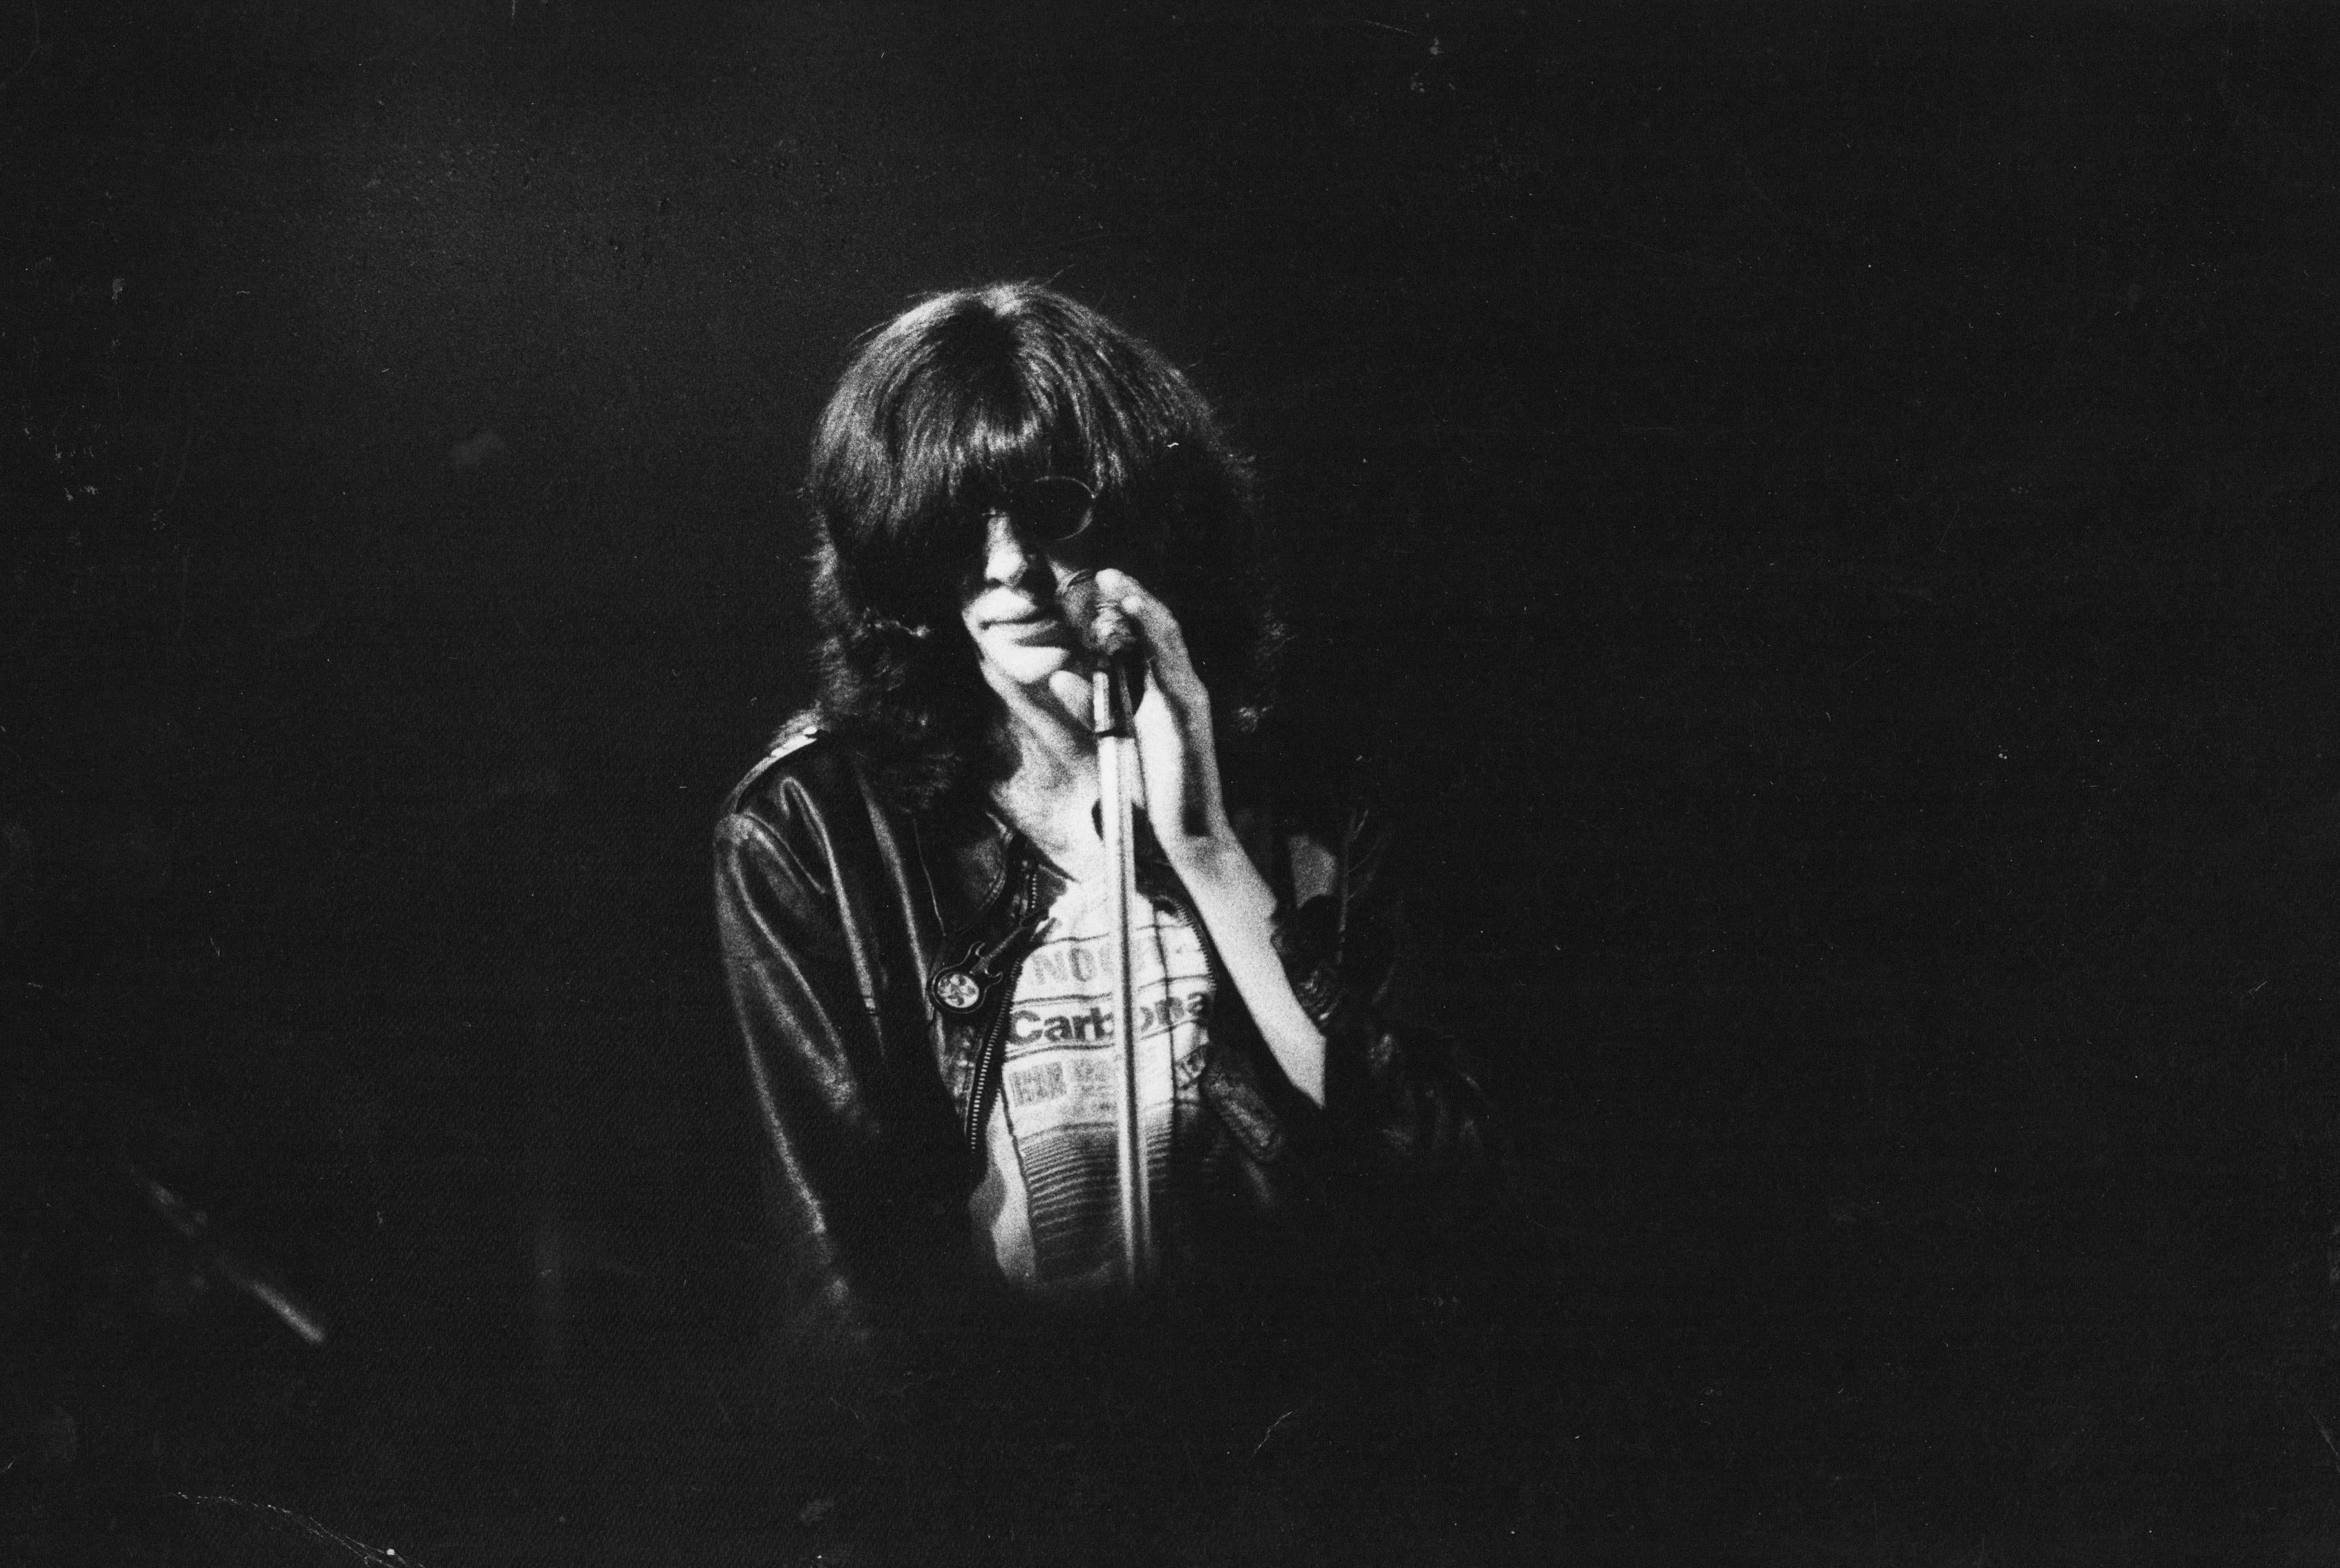 Paul Canty Portrait Photograph - Joey Ramone on Stage in Sunglasses Vintage Original Photograph